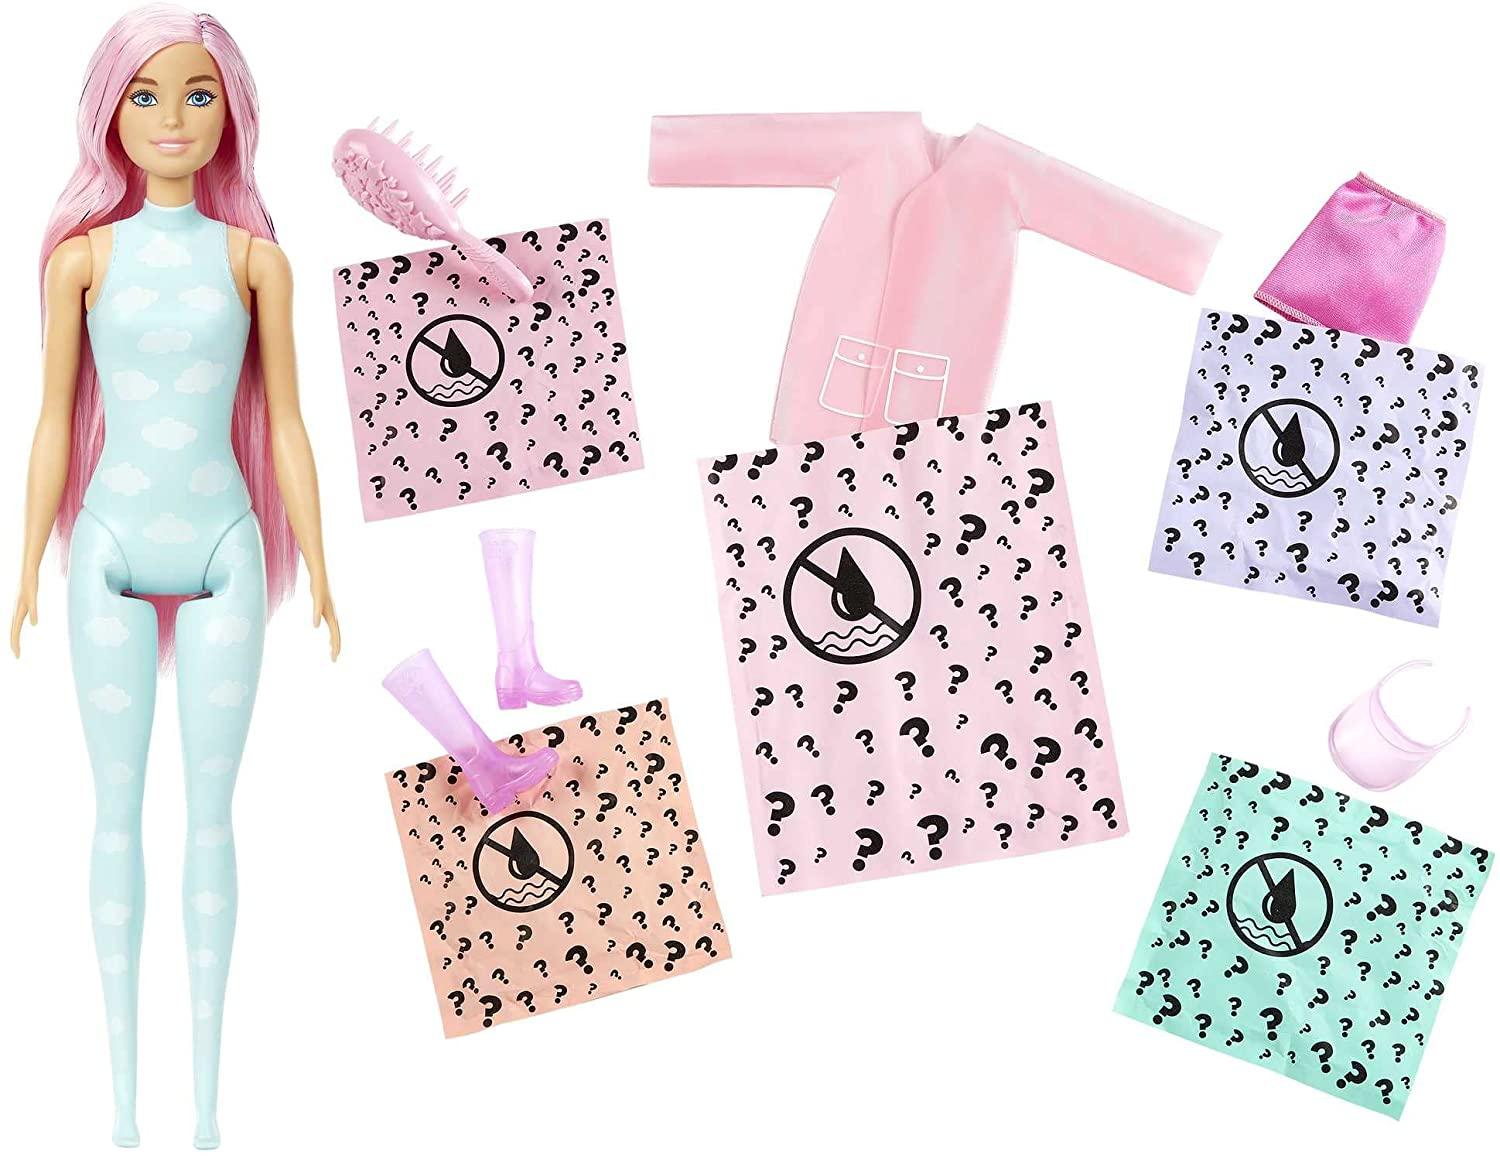 Barbie Color Reveal Doll with 7 Unboxing Surprises